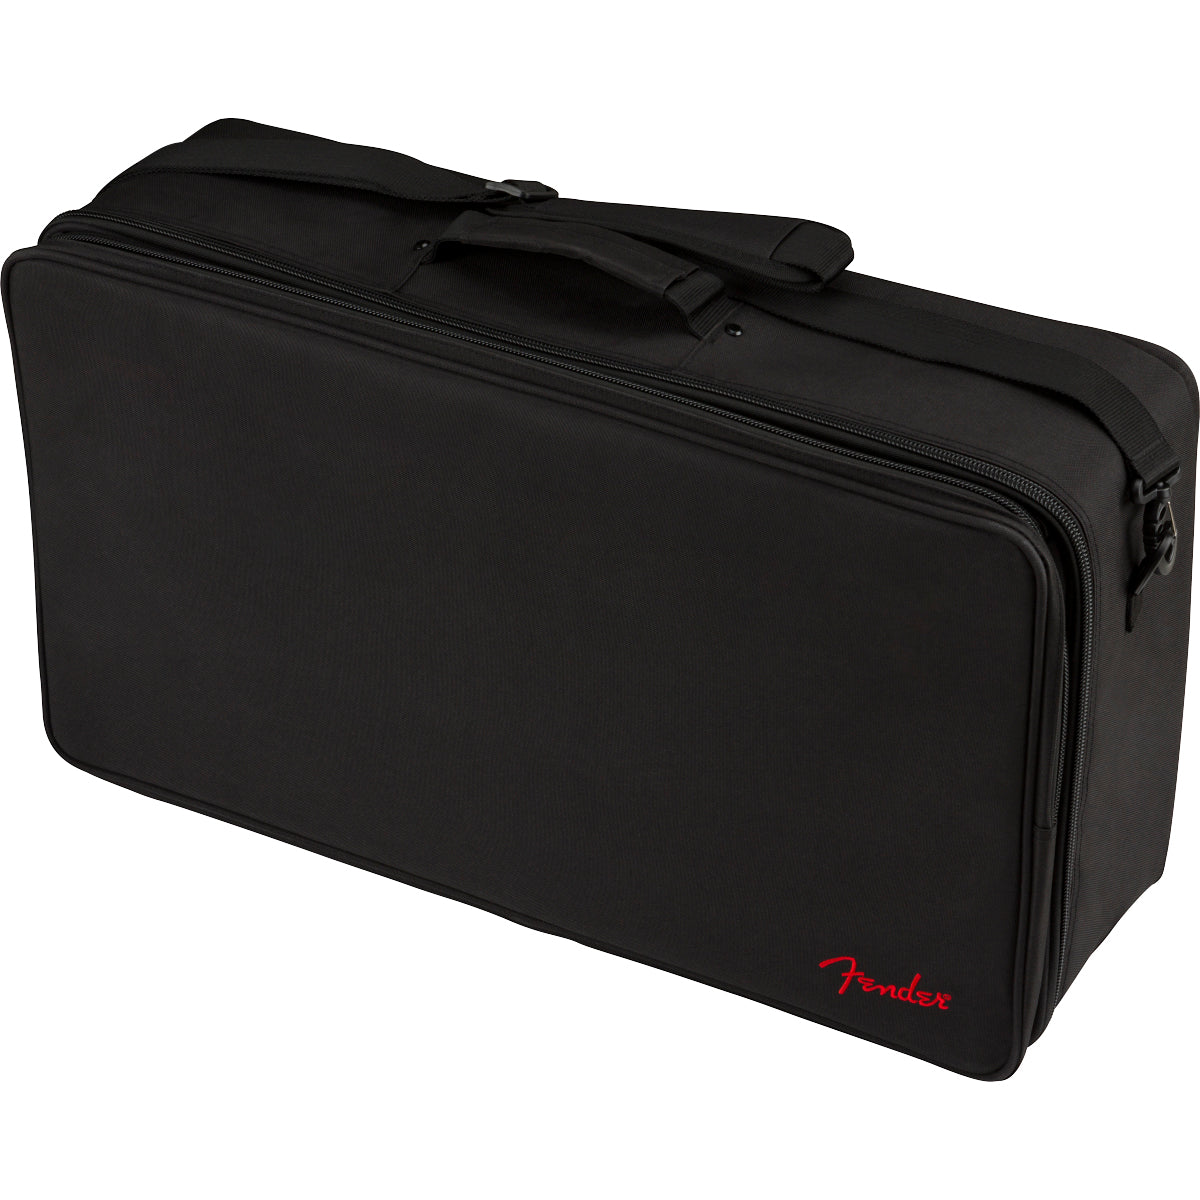 Included carry bag for the medium Fender Professional Pedal Board